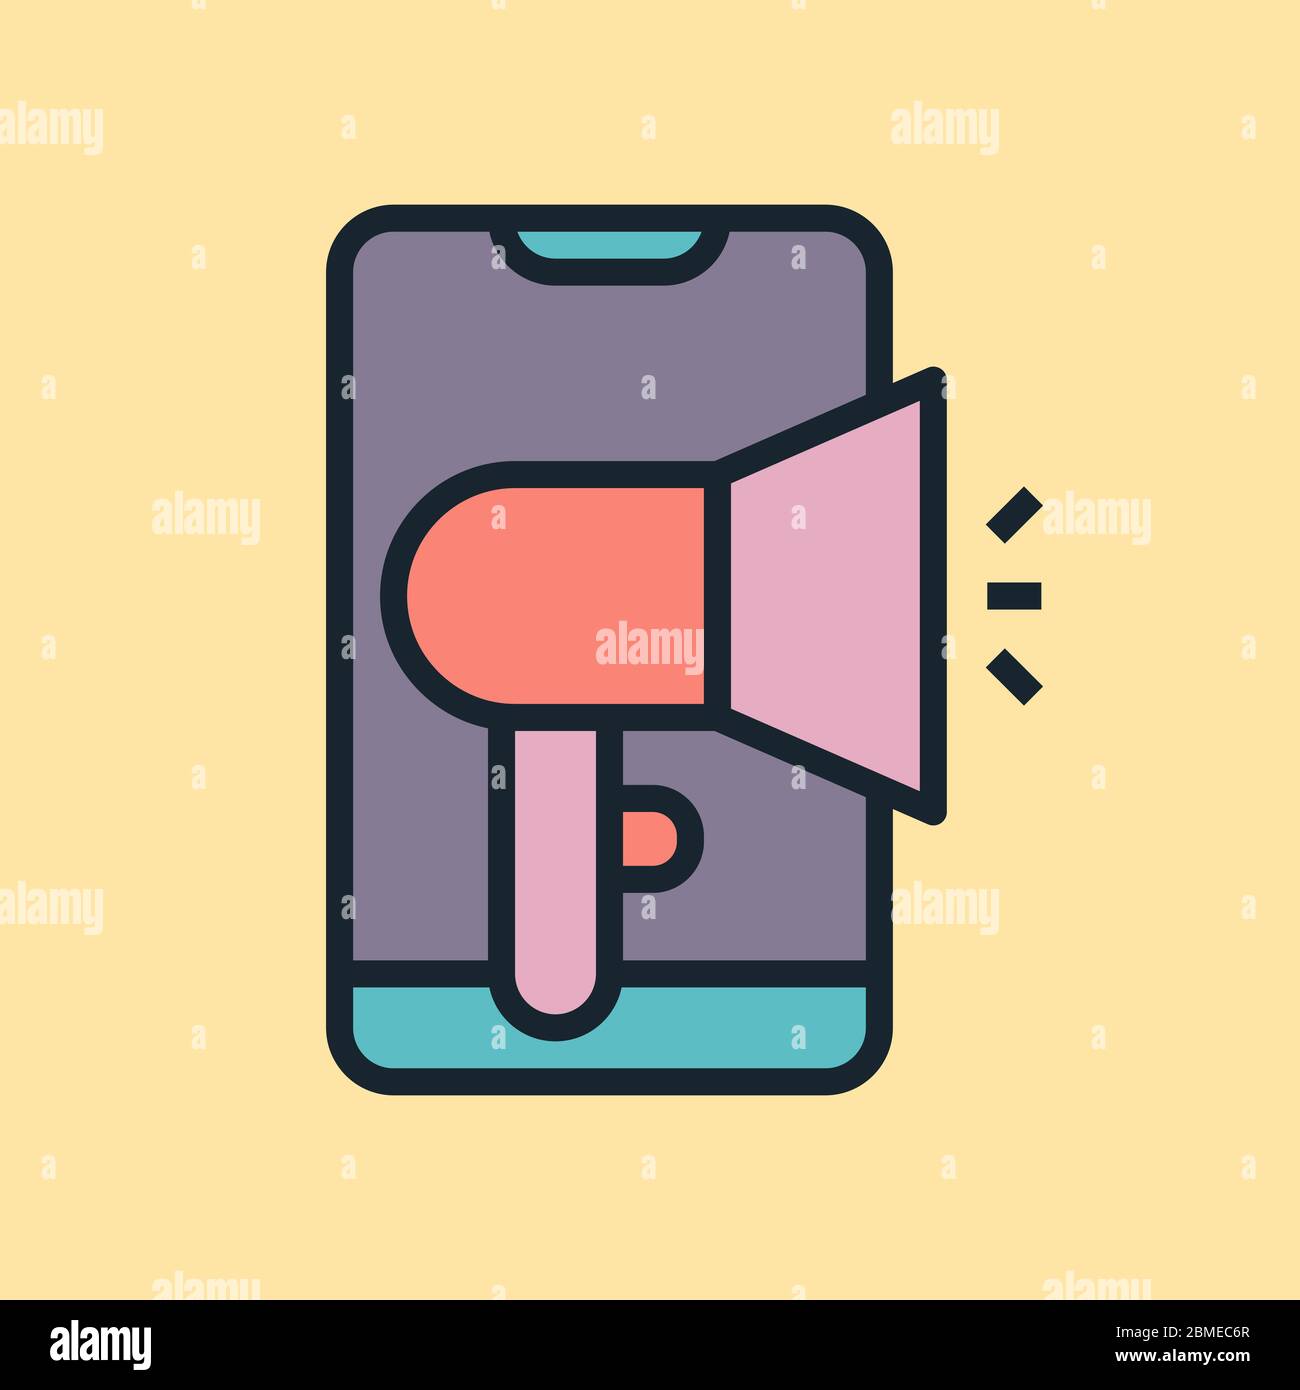 Mobile marketing. Concept illustration, flat design linear style banner. Usage for e-mail newsletters, headers, blog posts, print and more. Vector Stock Vector